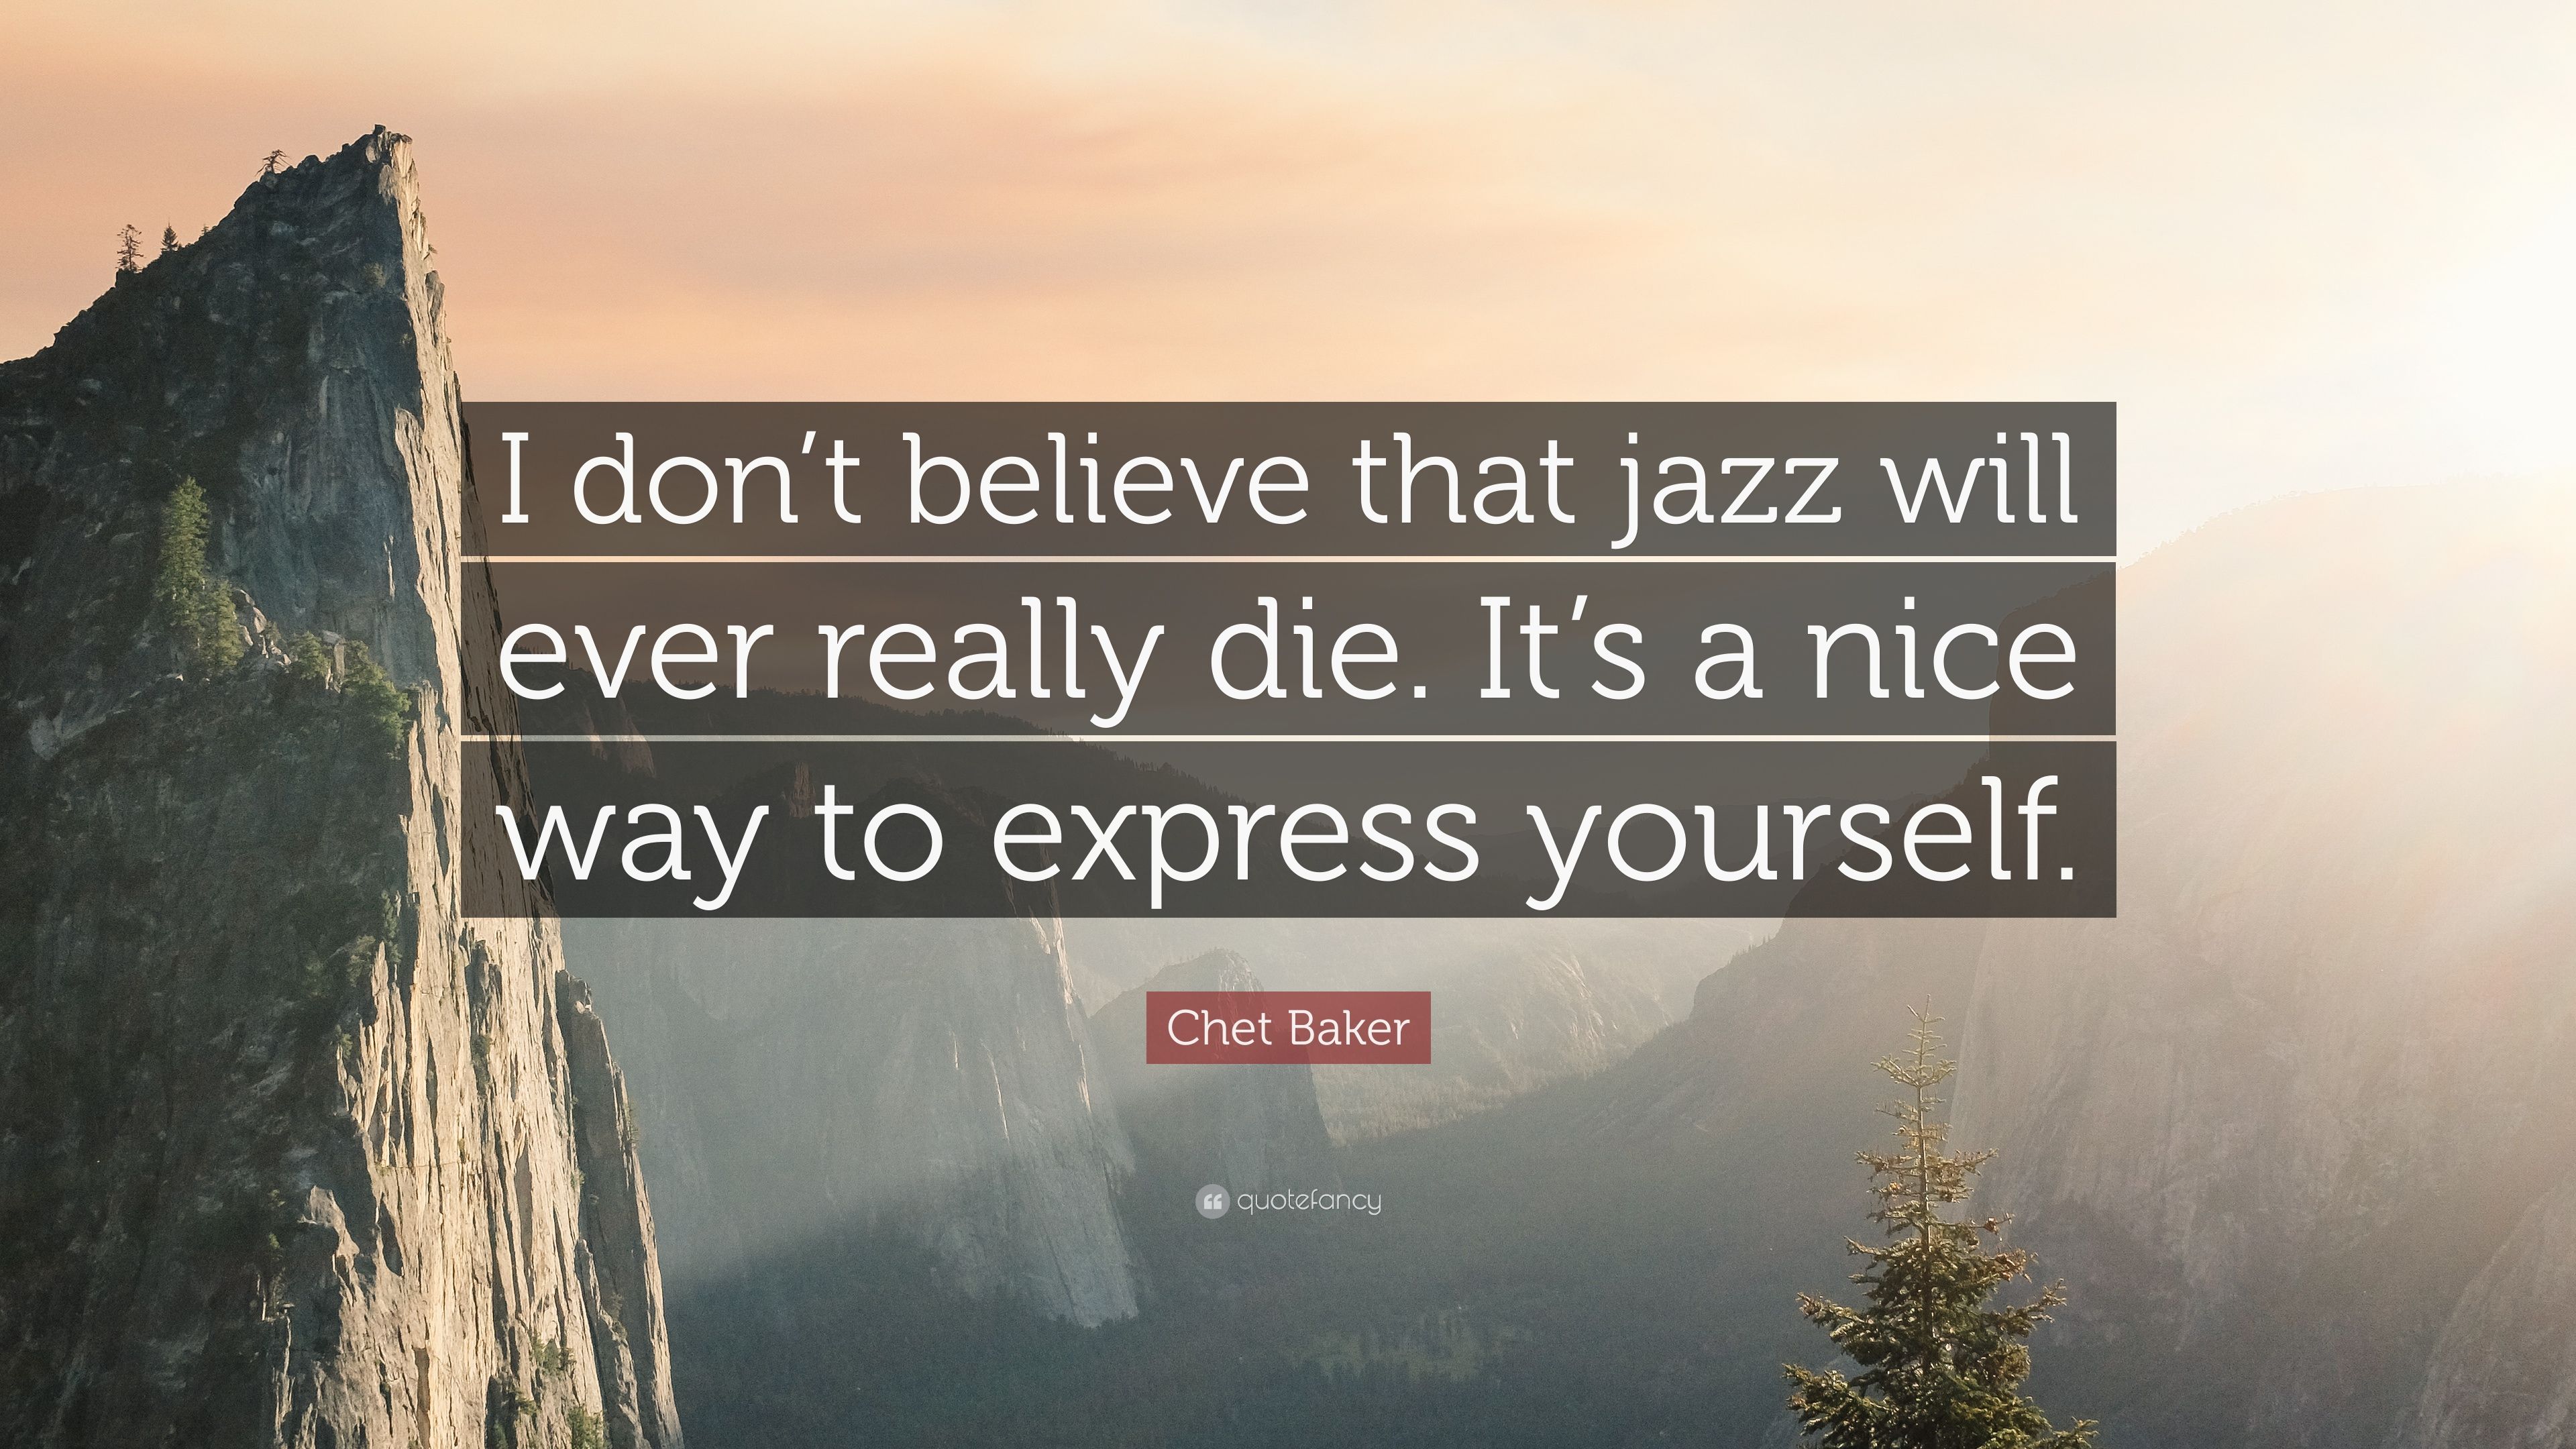 Chet Baker Quote: “I don't believe that jazz will ever really die